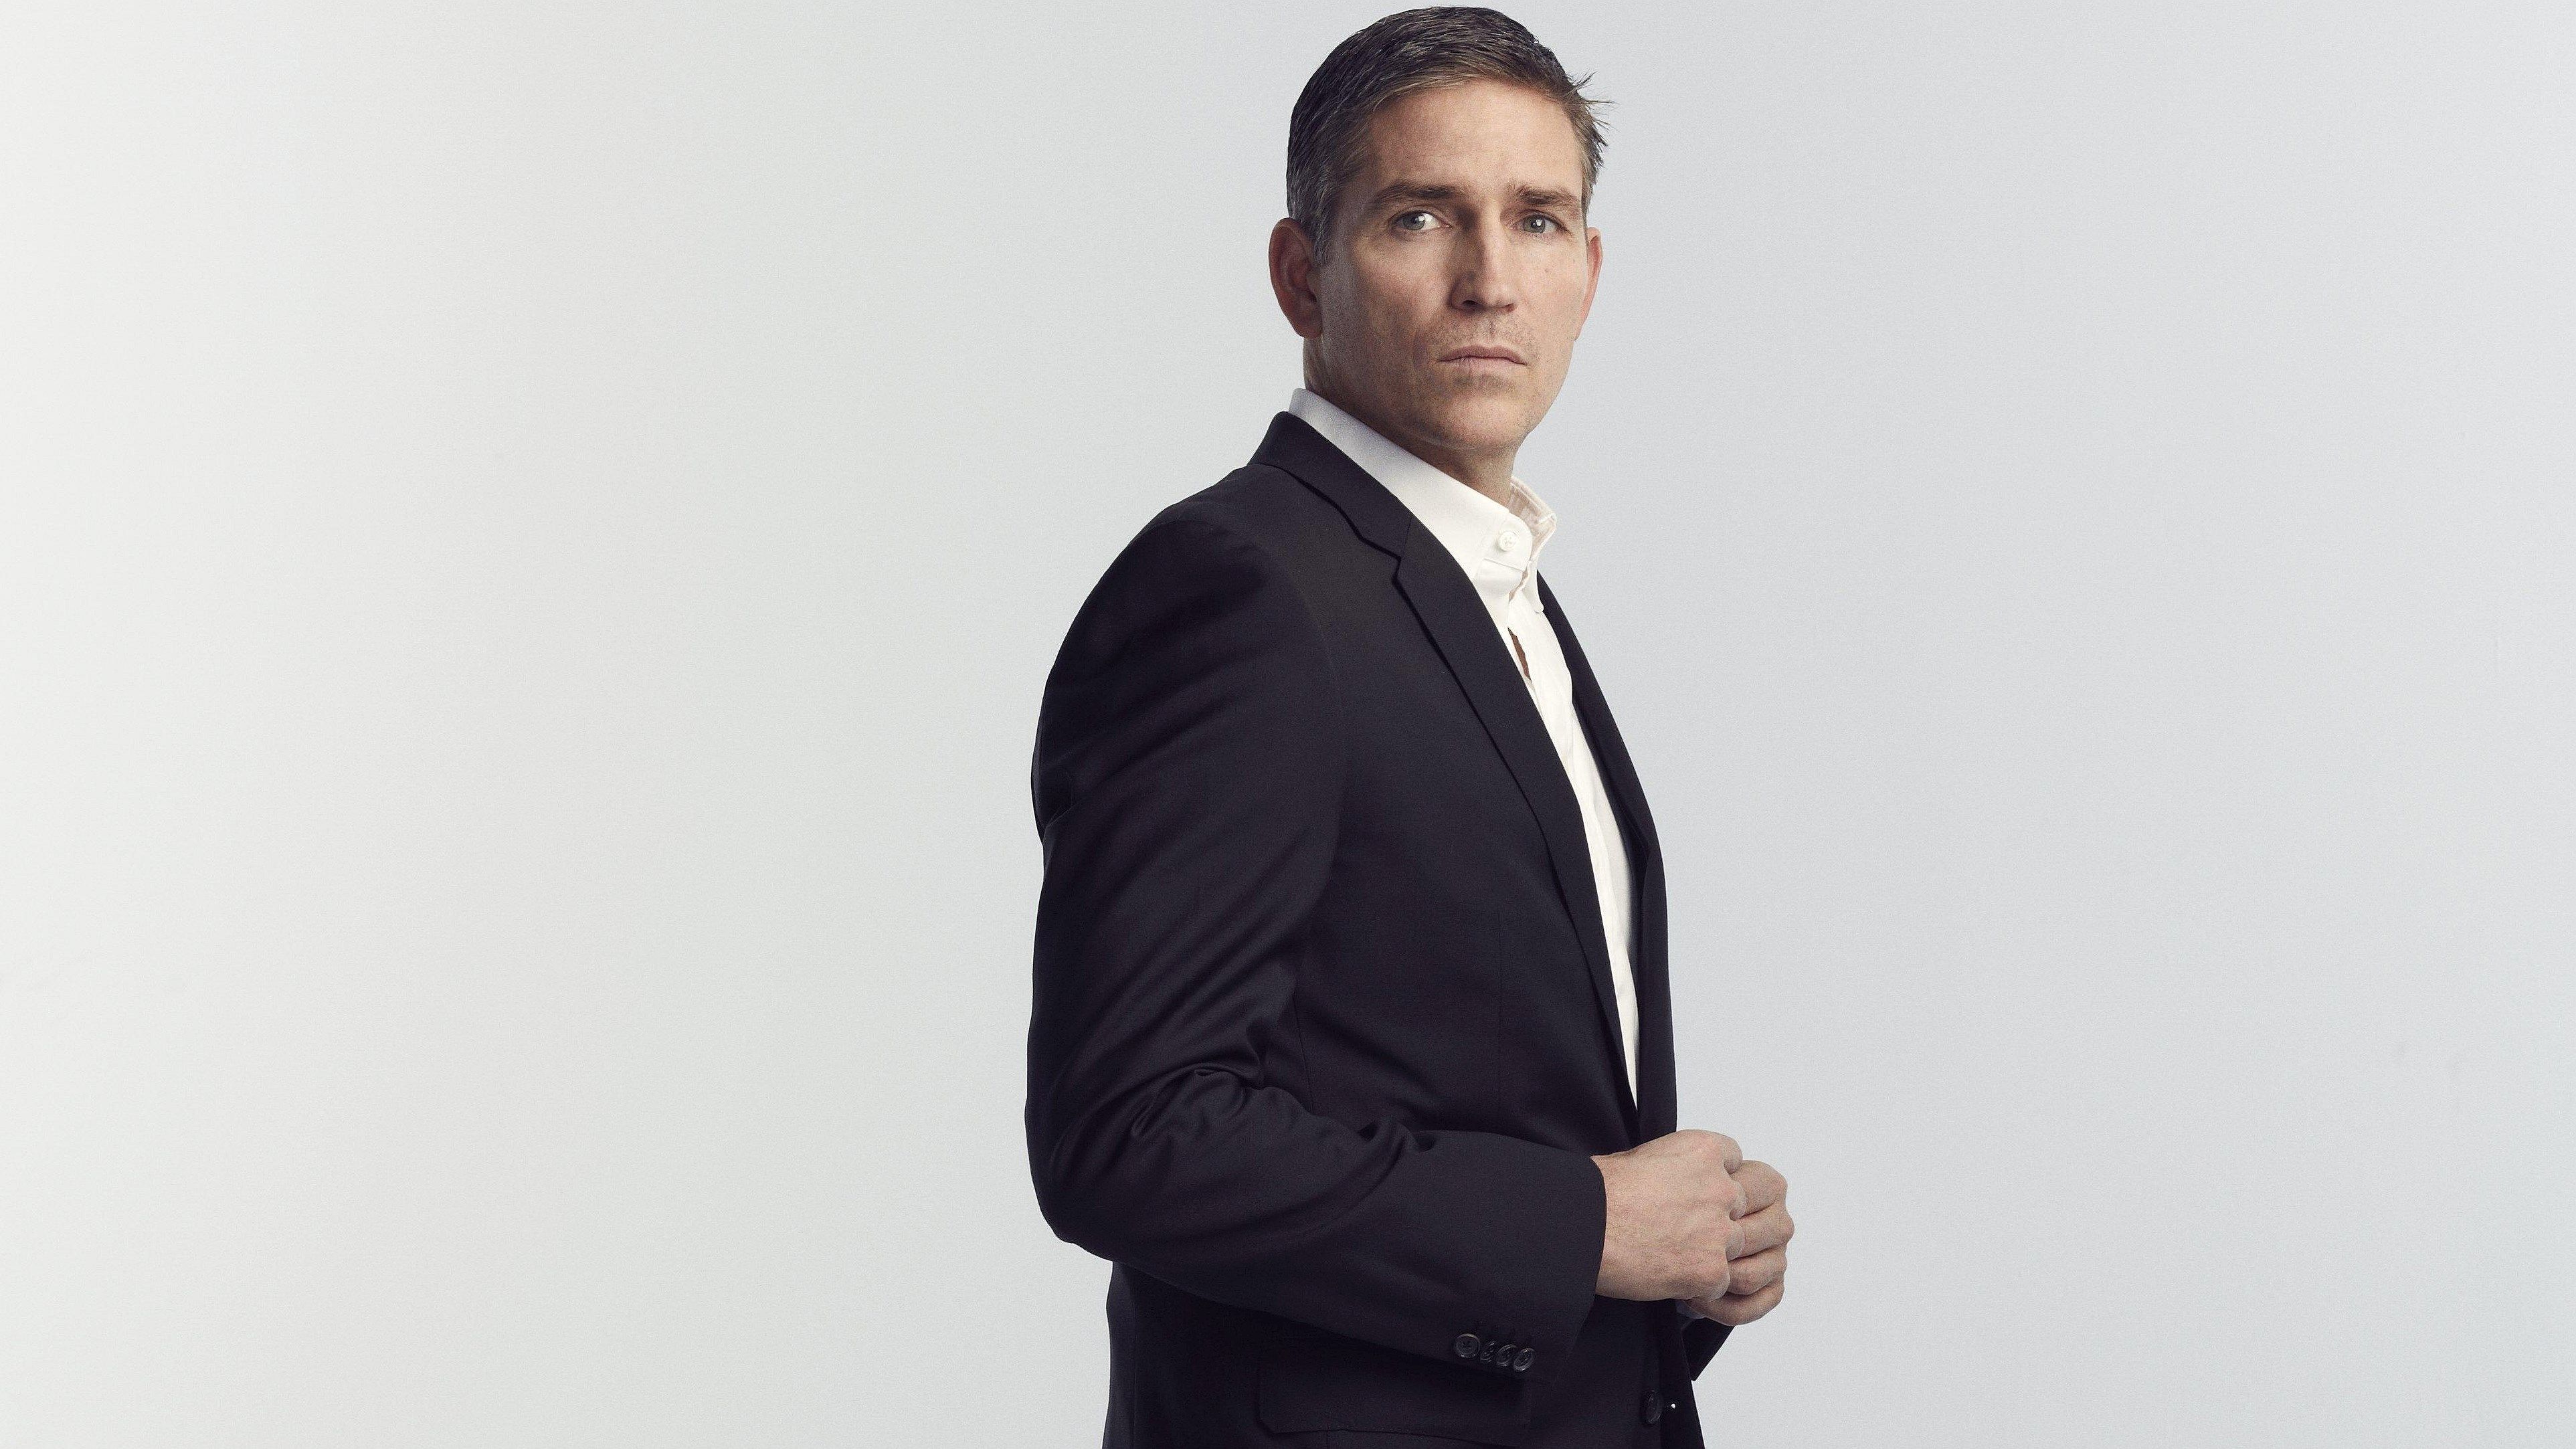 Picture for Desktop: person of interest. Person of interest, John